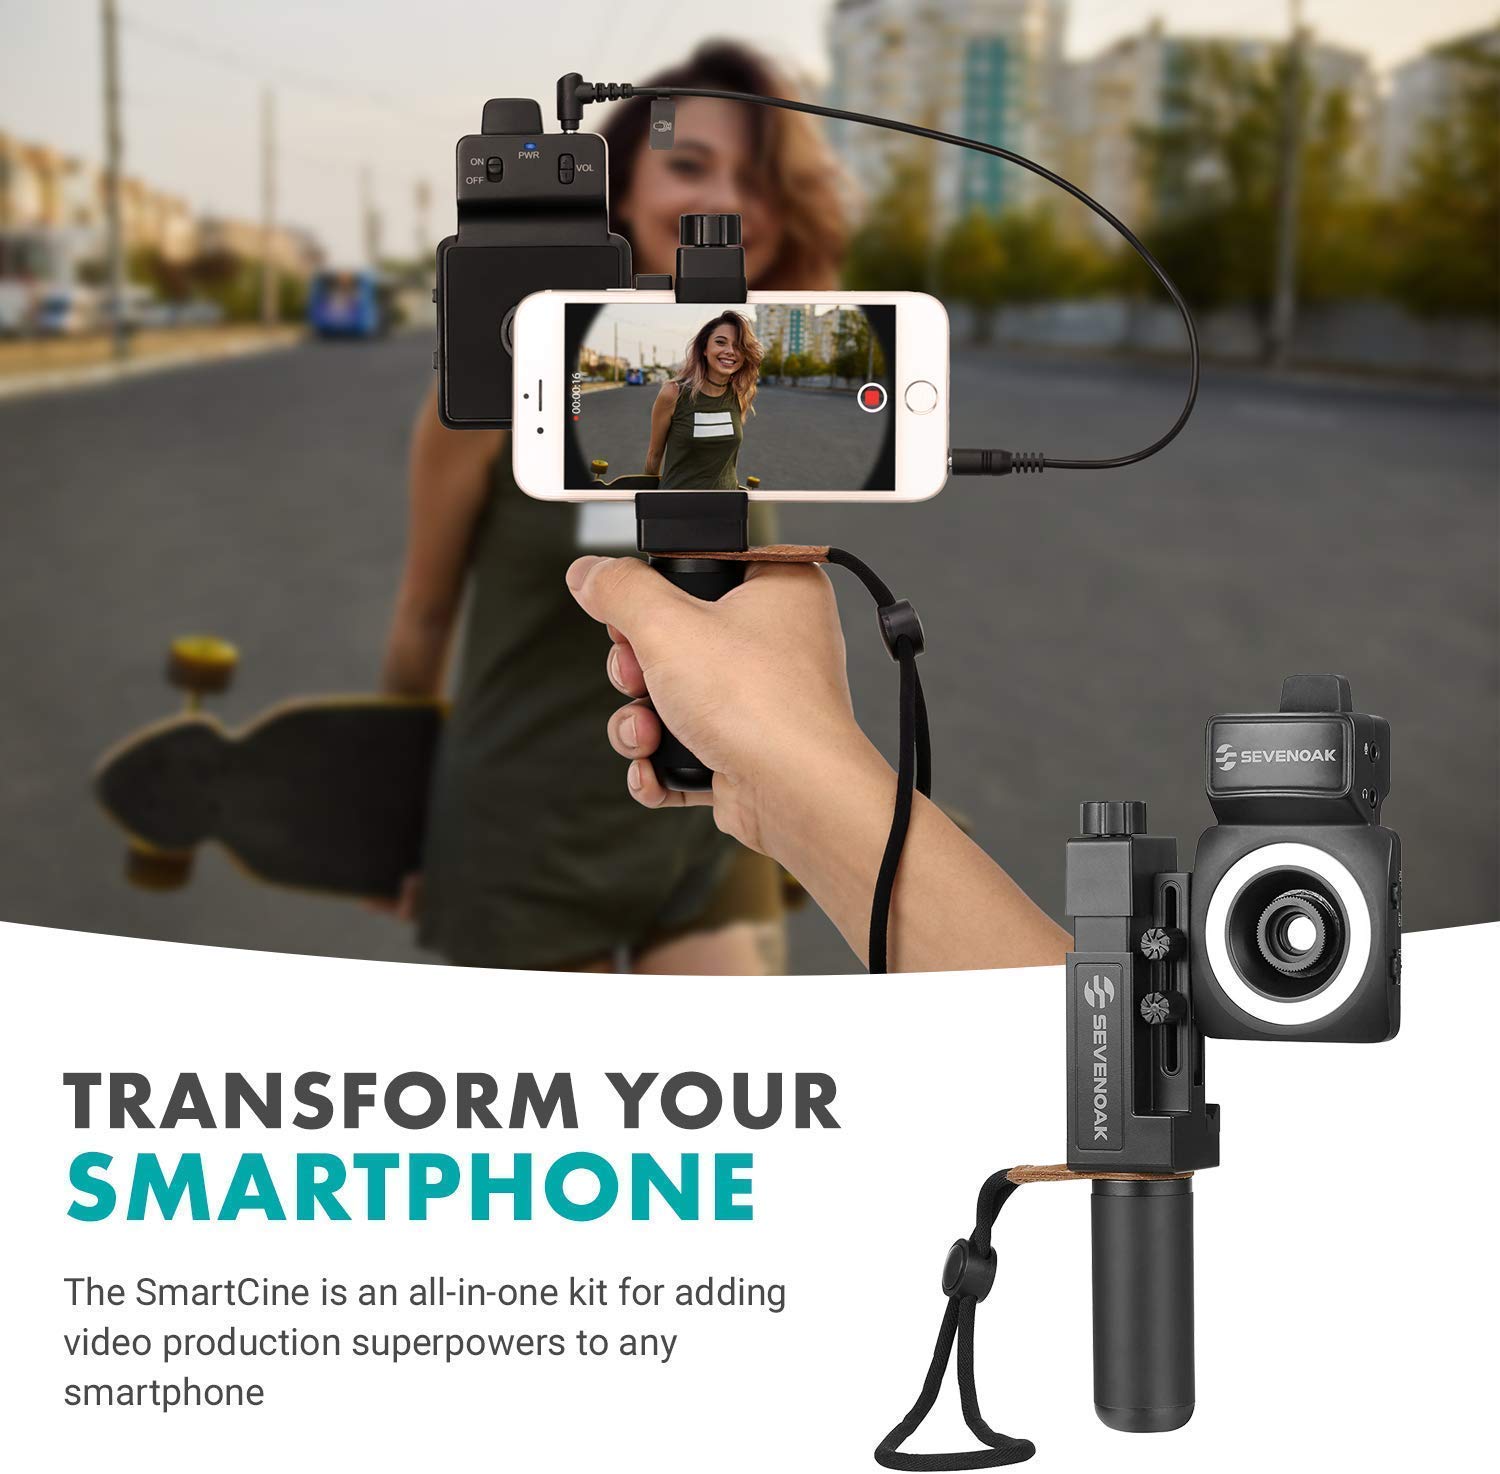 Movo SmartCine W2 - Wireless Smartphone Video Kit with Phone Rig, Dual Wireless Lavalier Microphone System, LED Light, Wide and Fisheye Lenses for iPhone/Android Phones - YouTube, TIK Tok Kit  - Like New